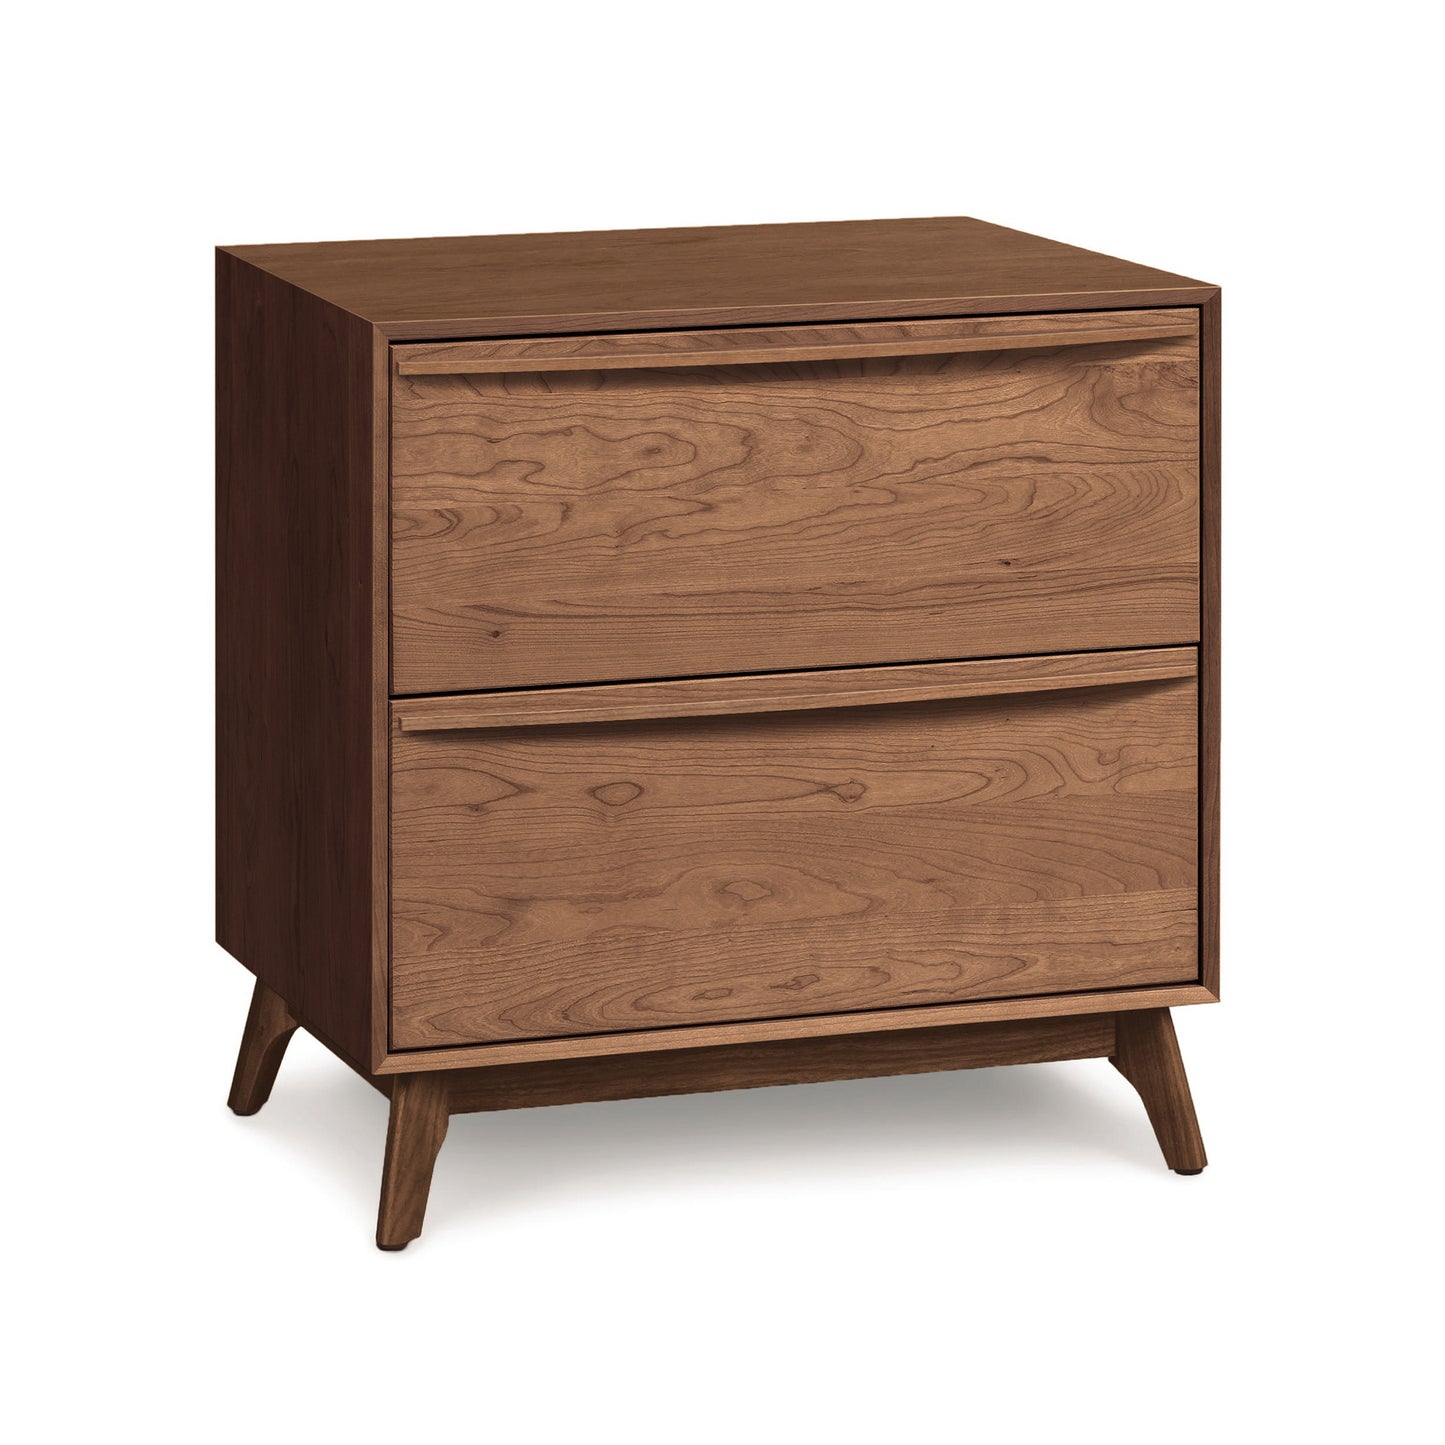 Sentence using the given product name and brand name: A contemporary style Copeland Furniture Catalina 2-Drawer Nightstand, crafted from solid natural hardwoods with angled legs, isolated against a white background.